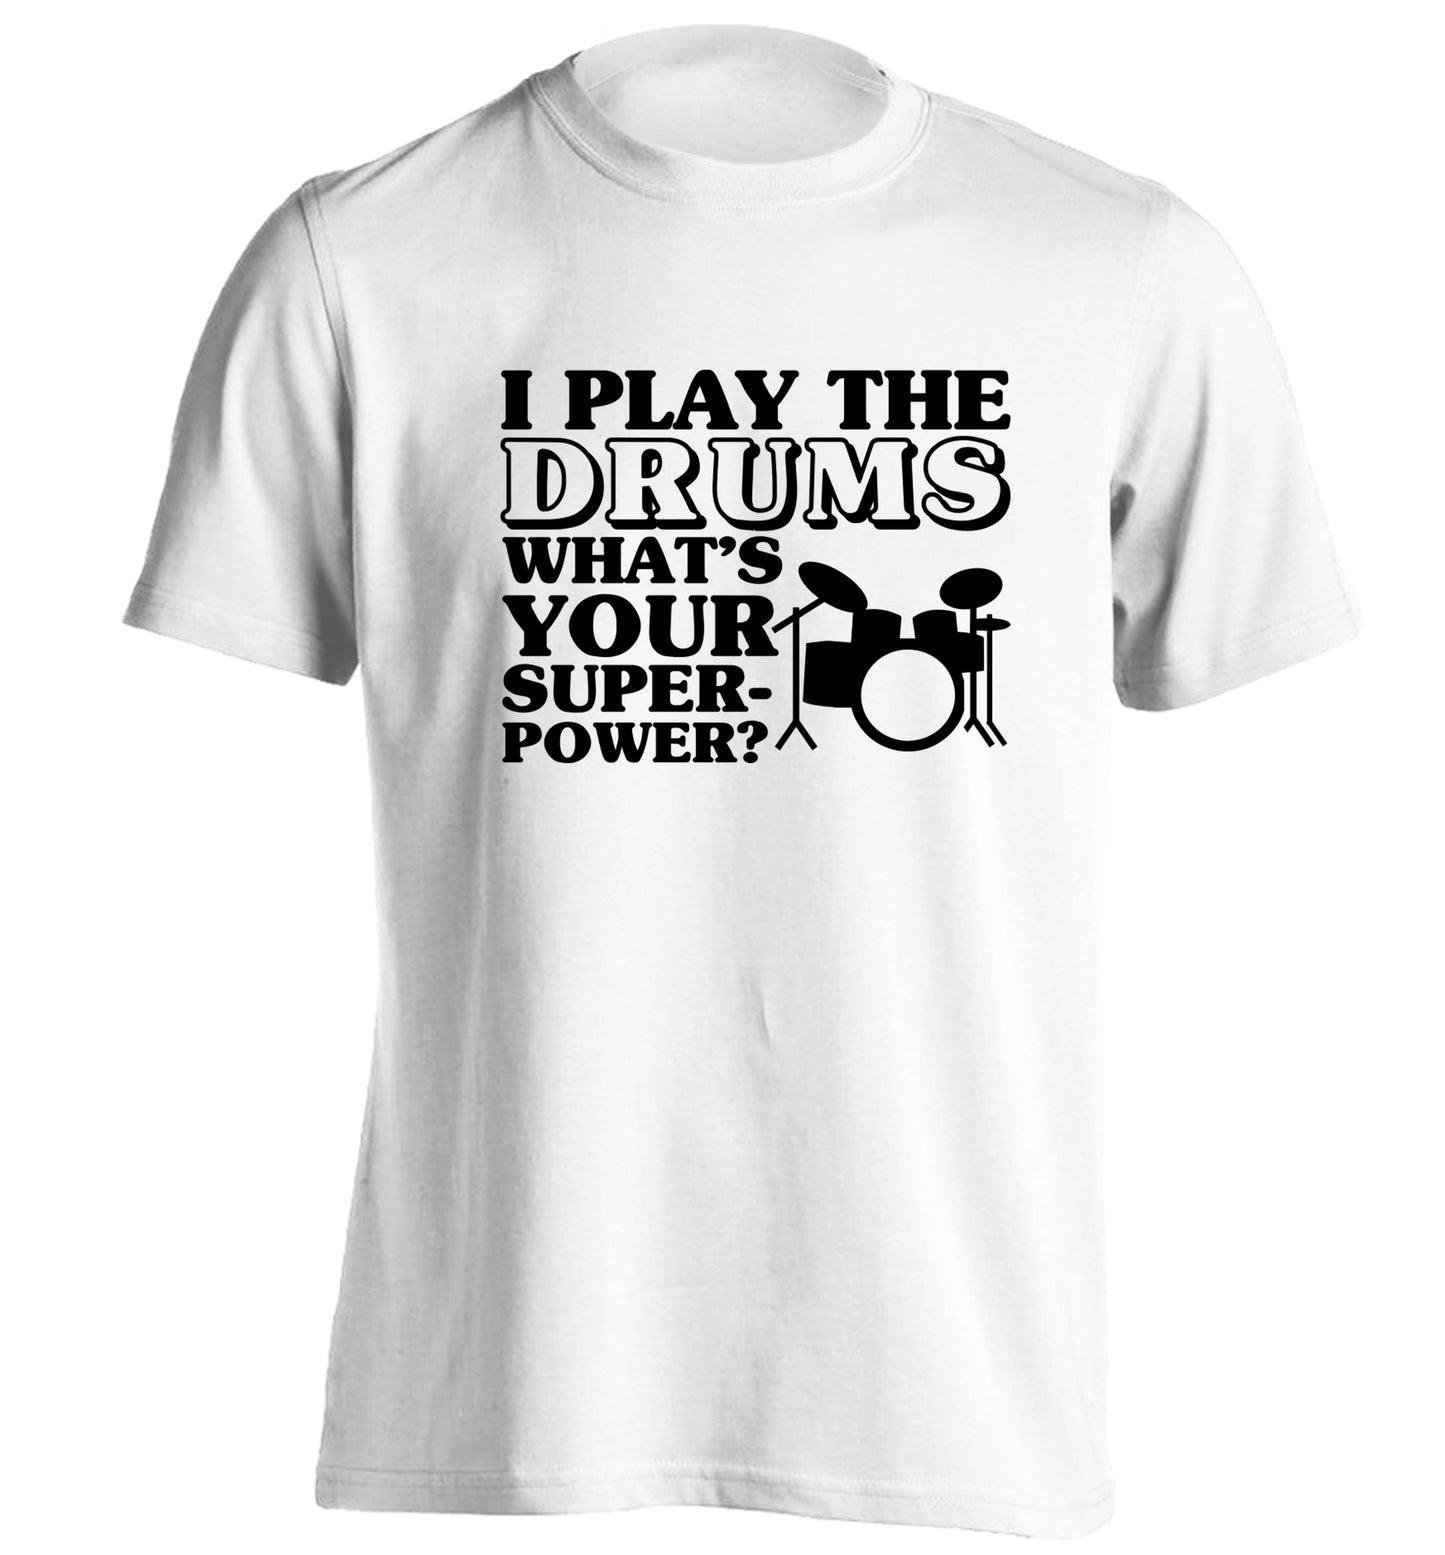 I play the drums what's your superpower? adults unisexwhite Tshirt 2XL